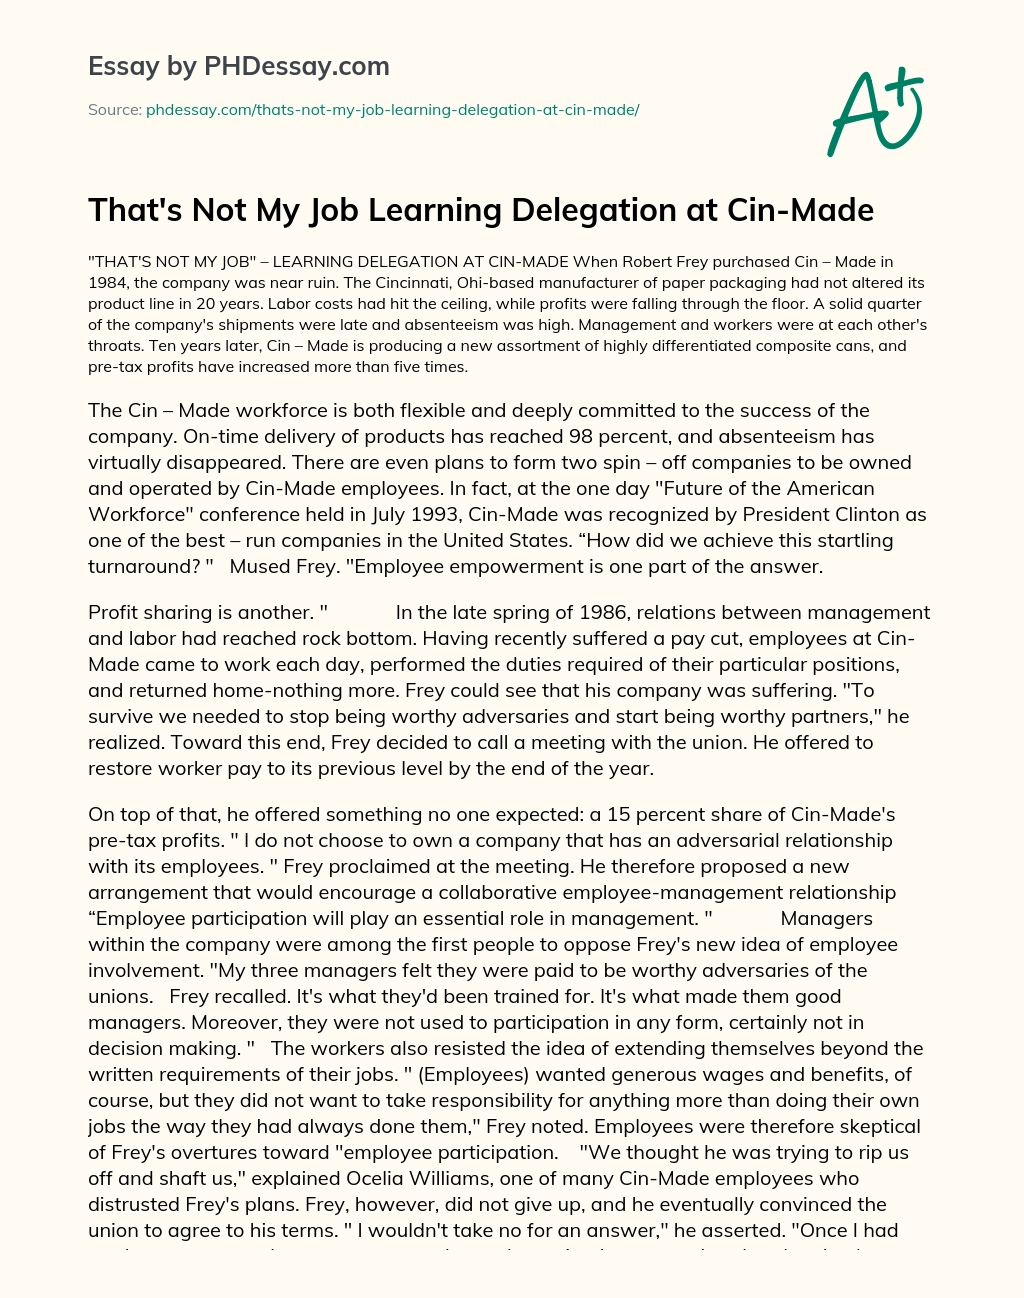 That’s Not My Job  Learning Delegation at Cin-Made essay